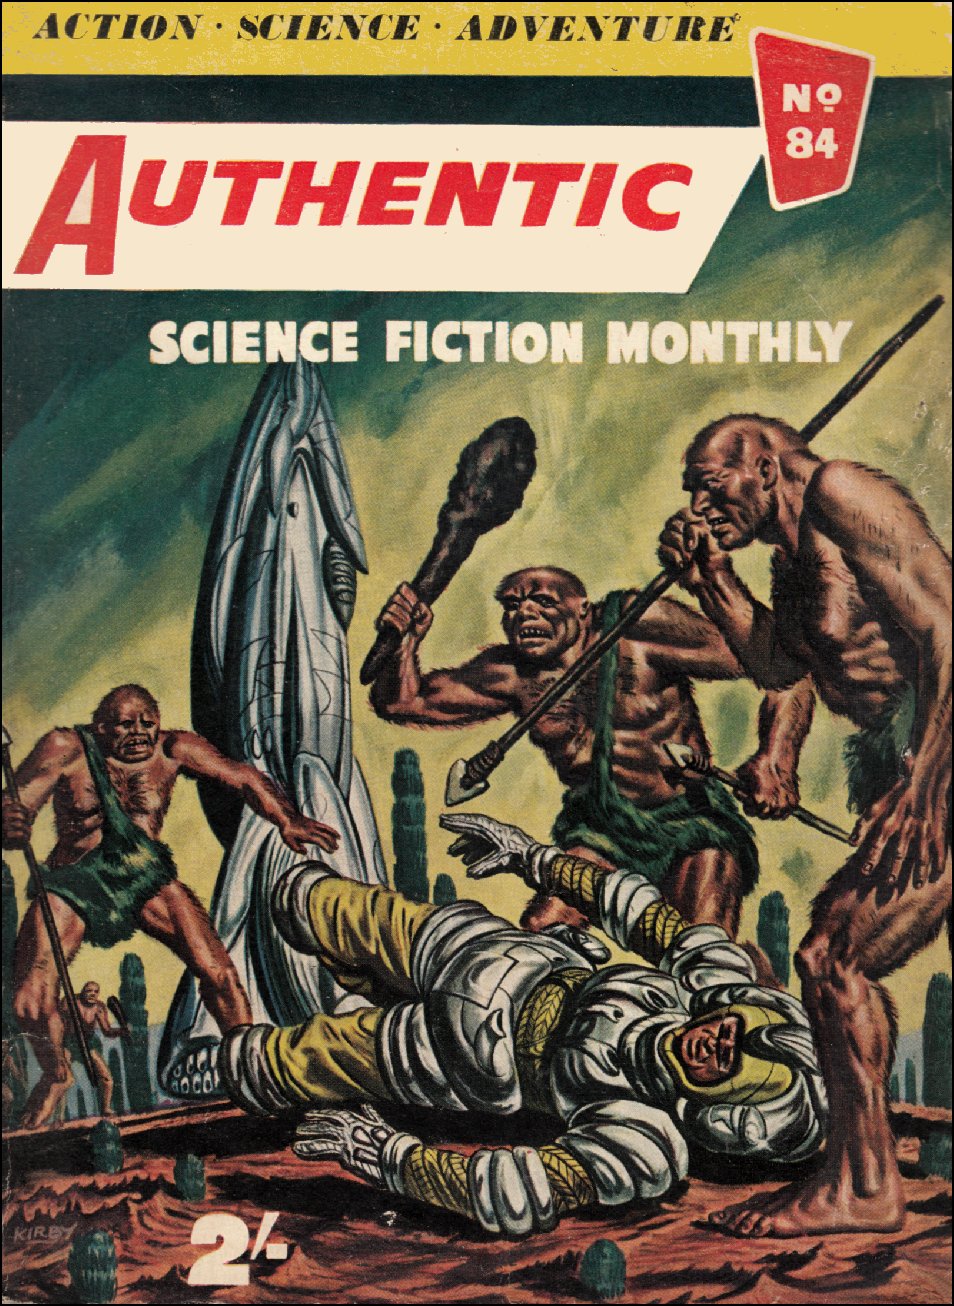 Authentic Science Fiction Monthly Number 84